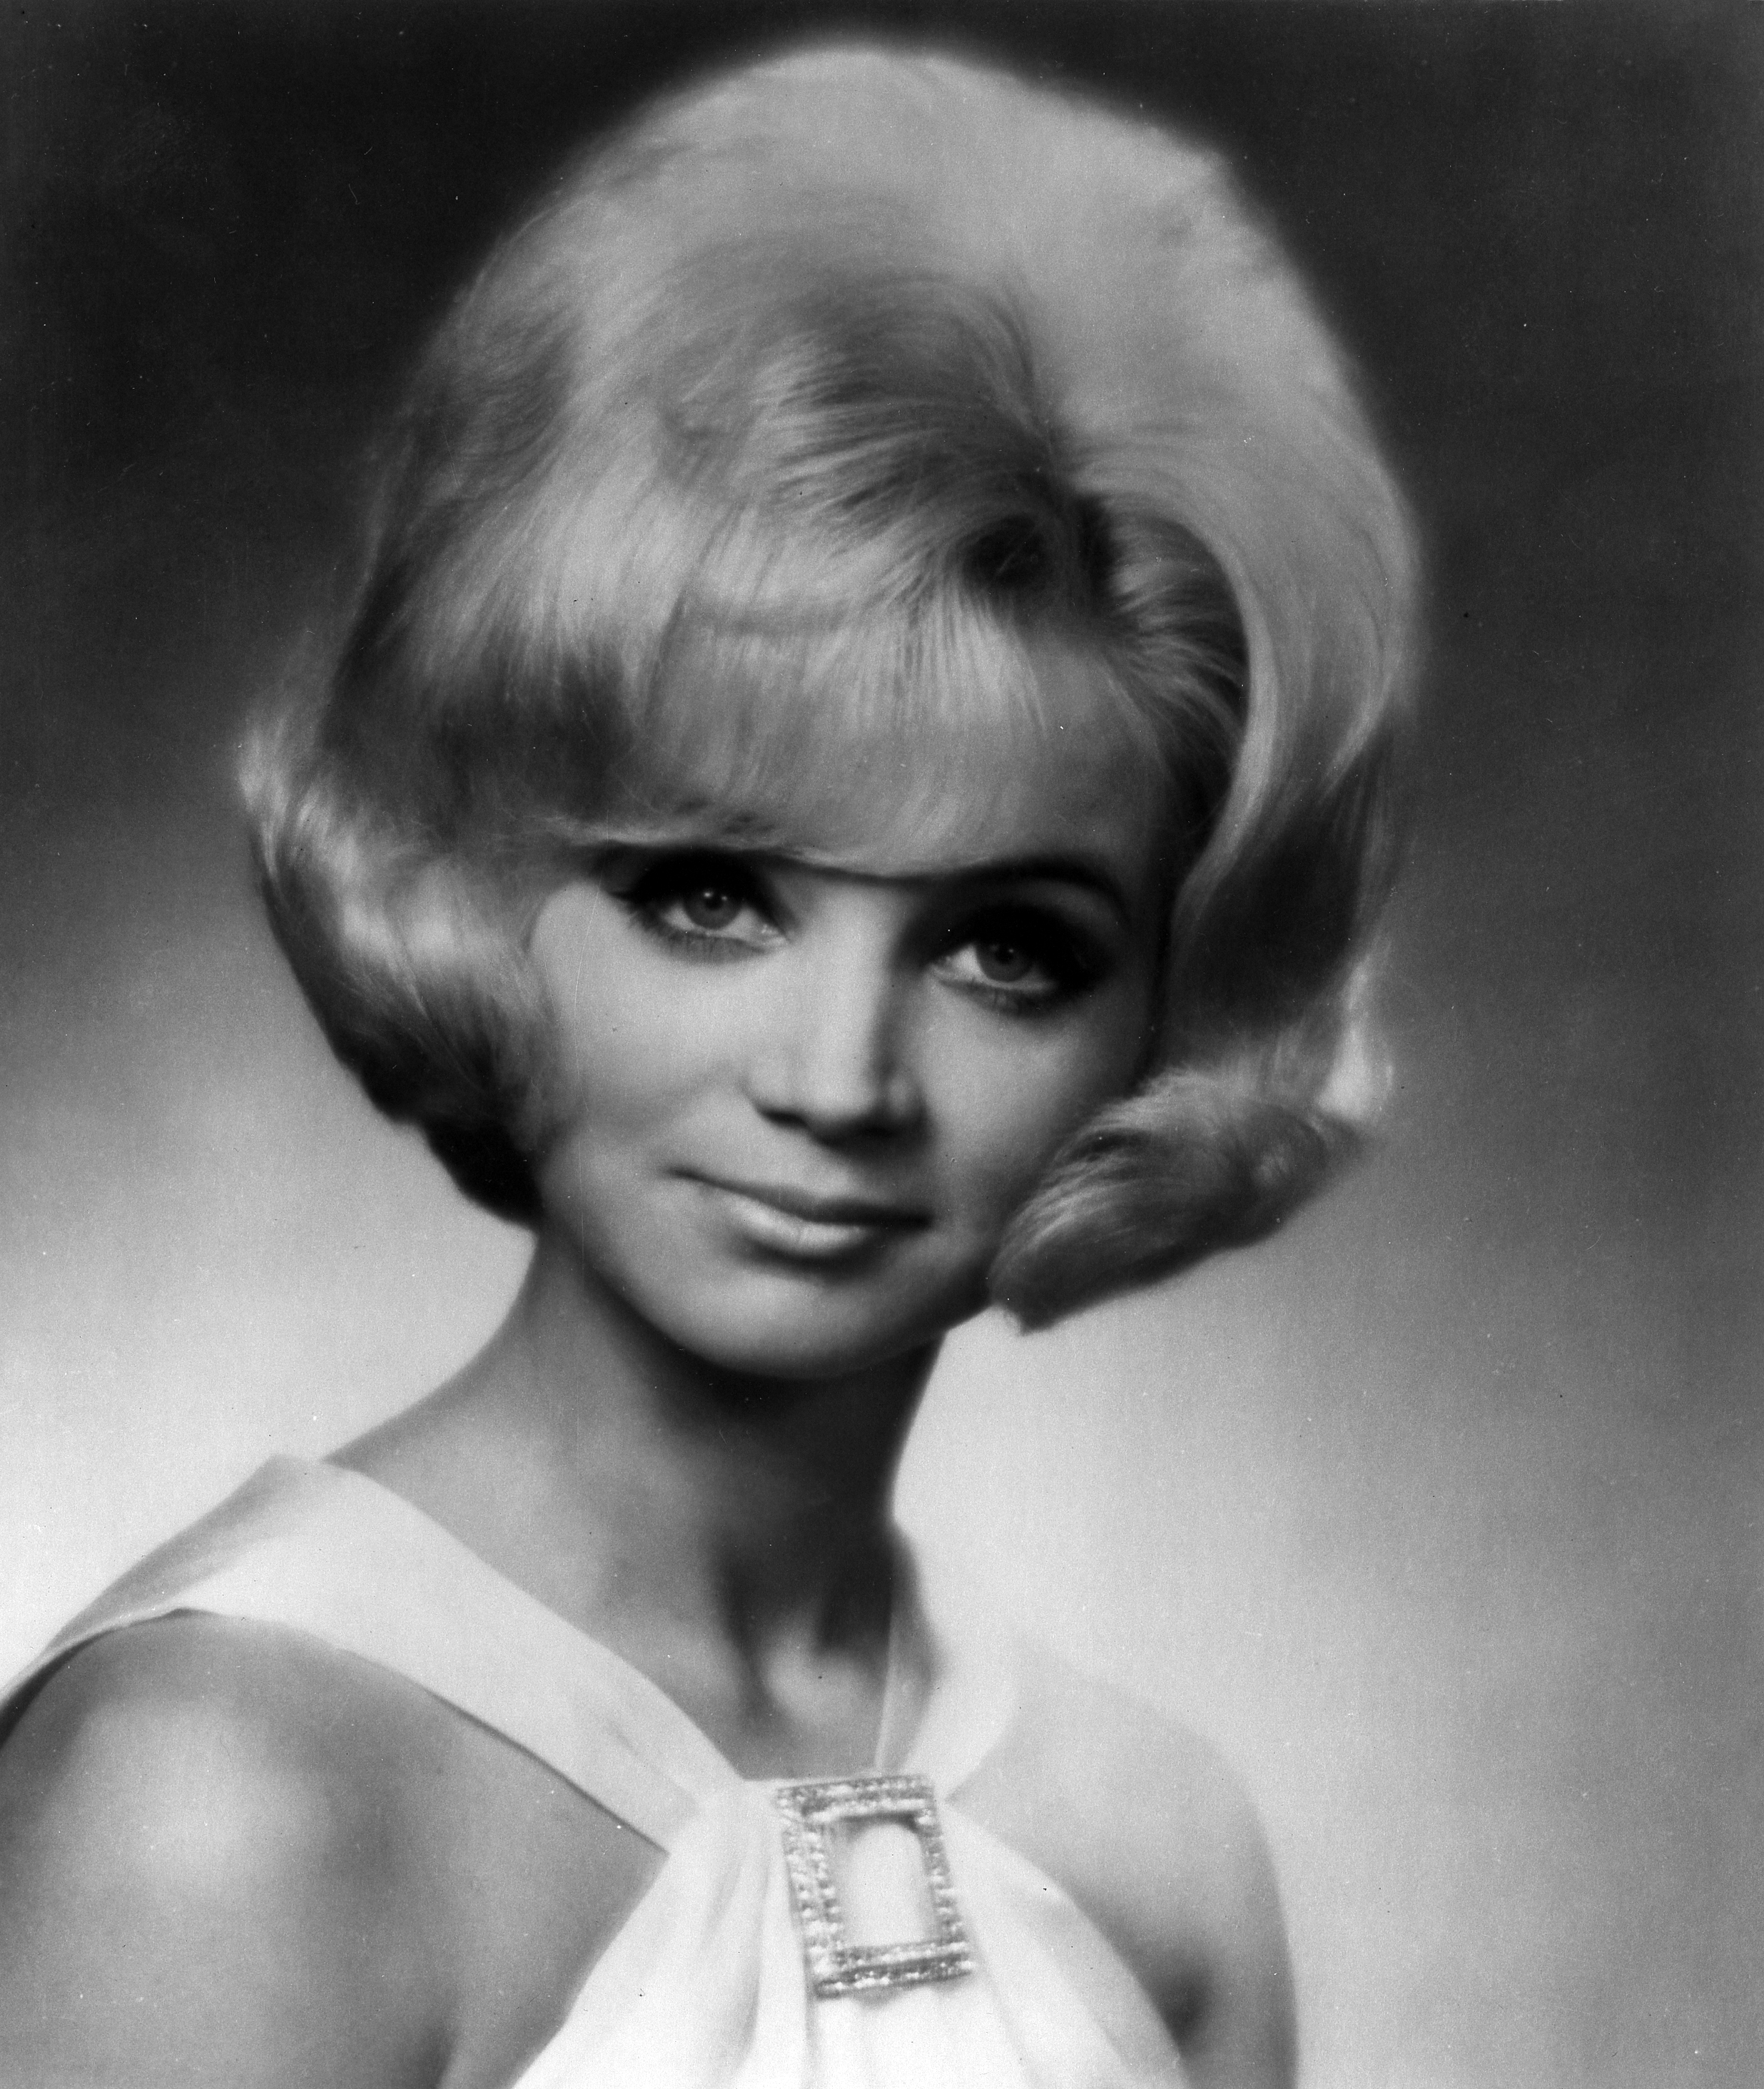 Barbara Mandrell, vers 1970. | Source : Getty Images